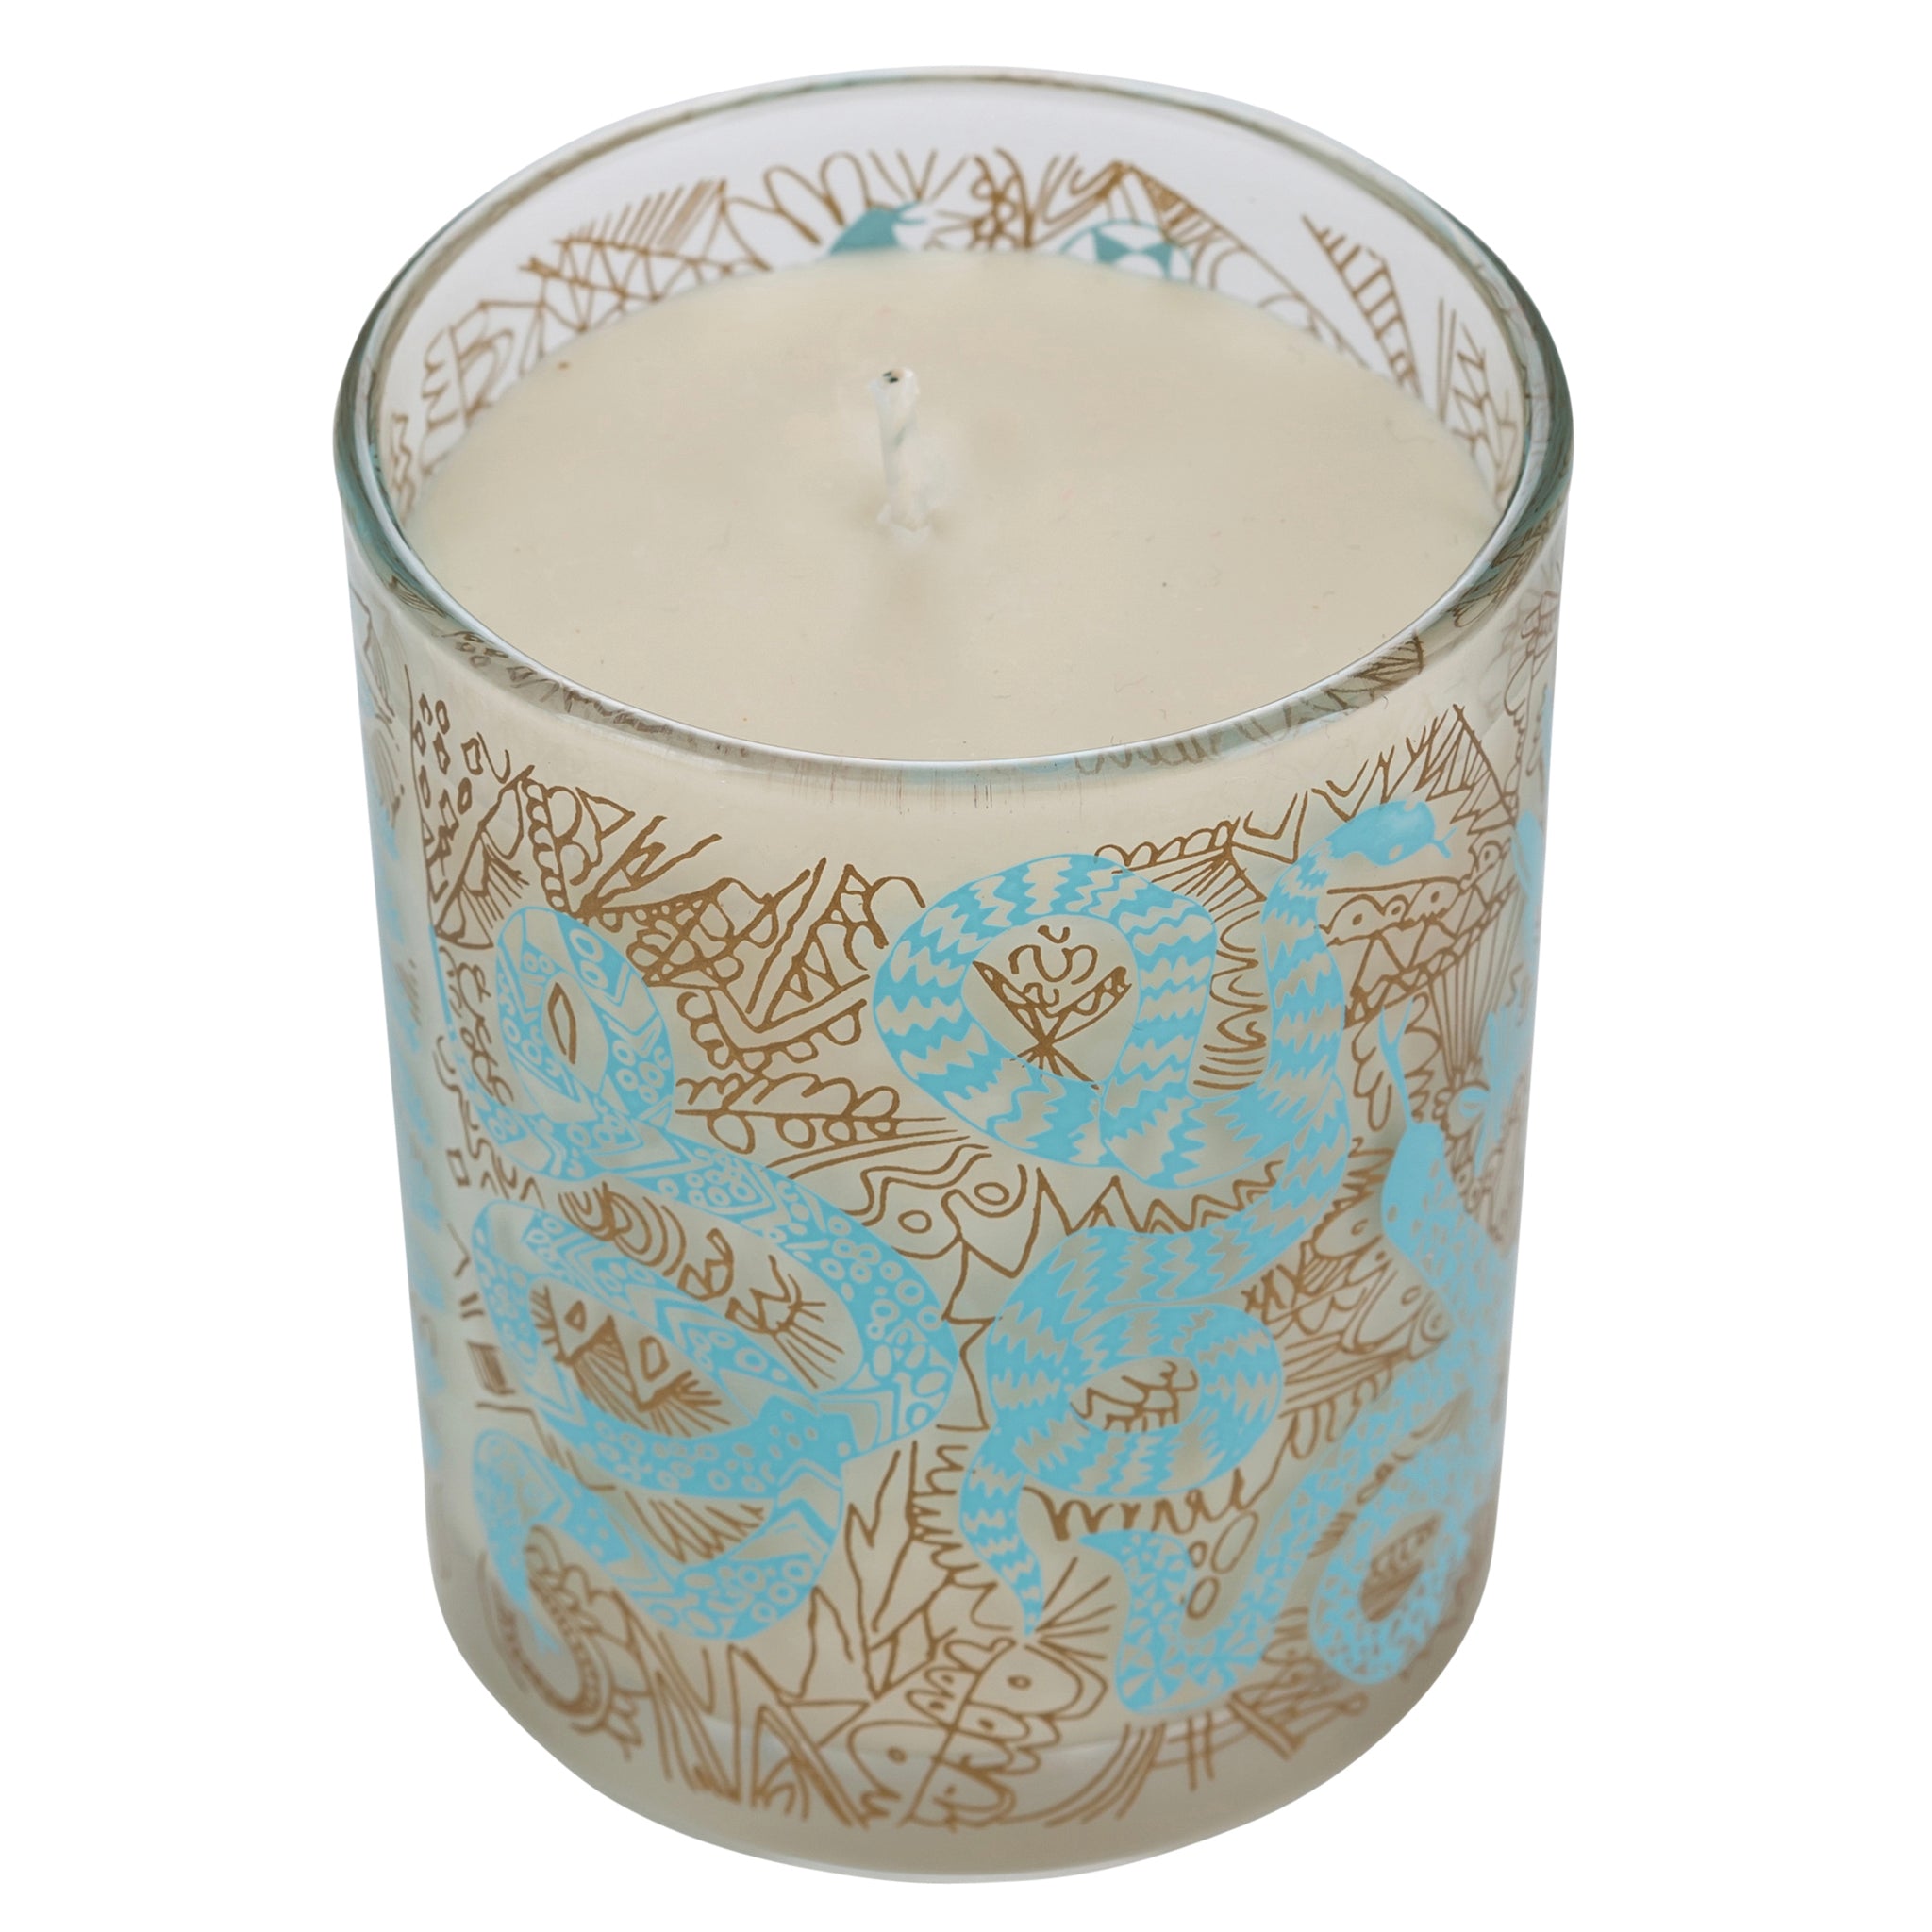 Enchanted, Amber & Tonka Bean Scented Plant Wax Candle, candle only